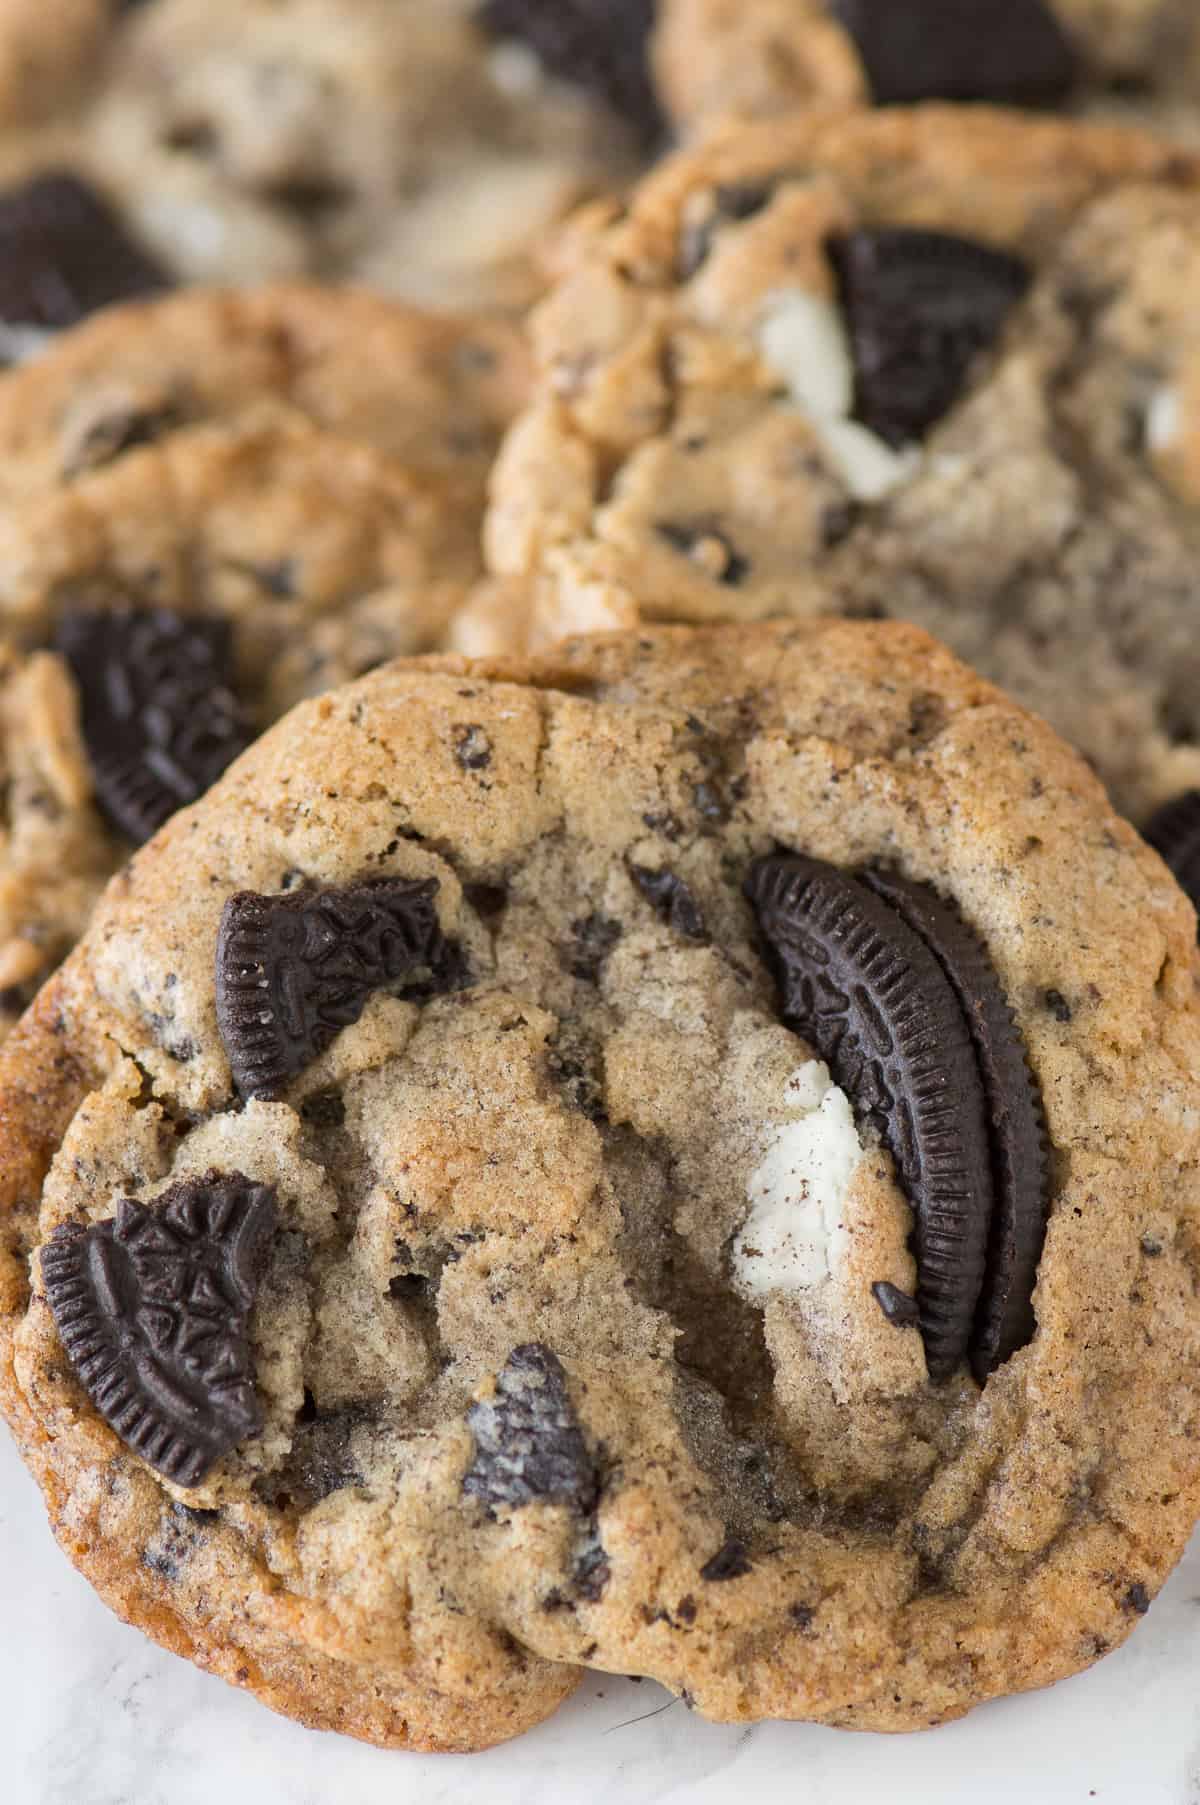 These cookies are loaded with 3 cups of chopped oreos! Some of the best oreo cookies or cookies & cream cookies we’ve tried! Crispy on the outside and chewy on the inside!